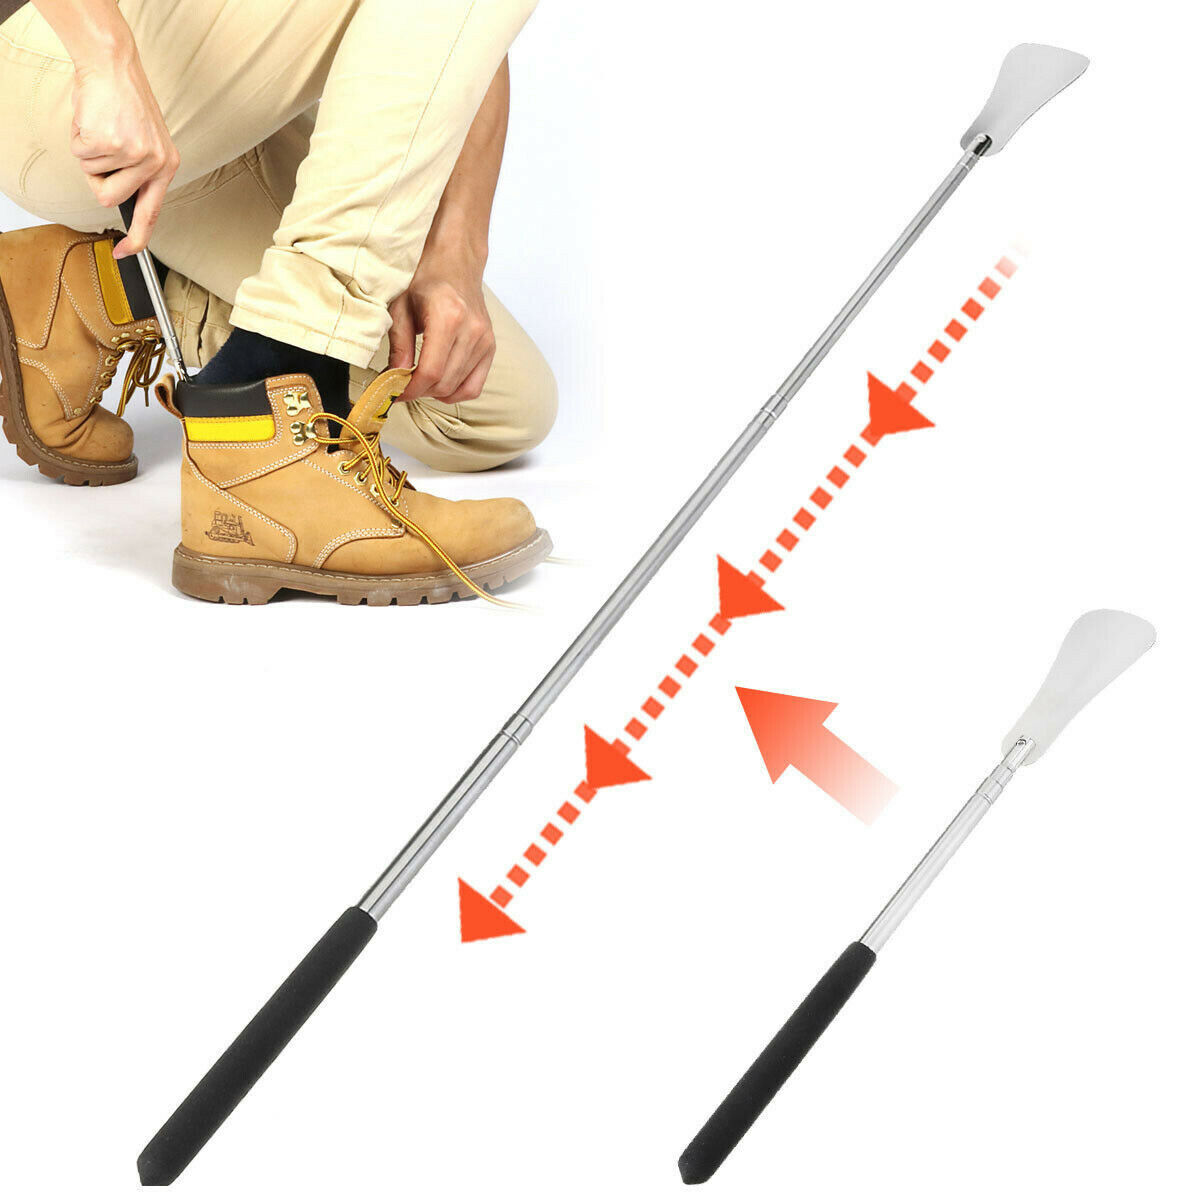 75cm Professional Long Adjustable Ranking TOP7 Oakland Mall Handle Ste Shoe Horn Stainless